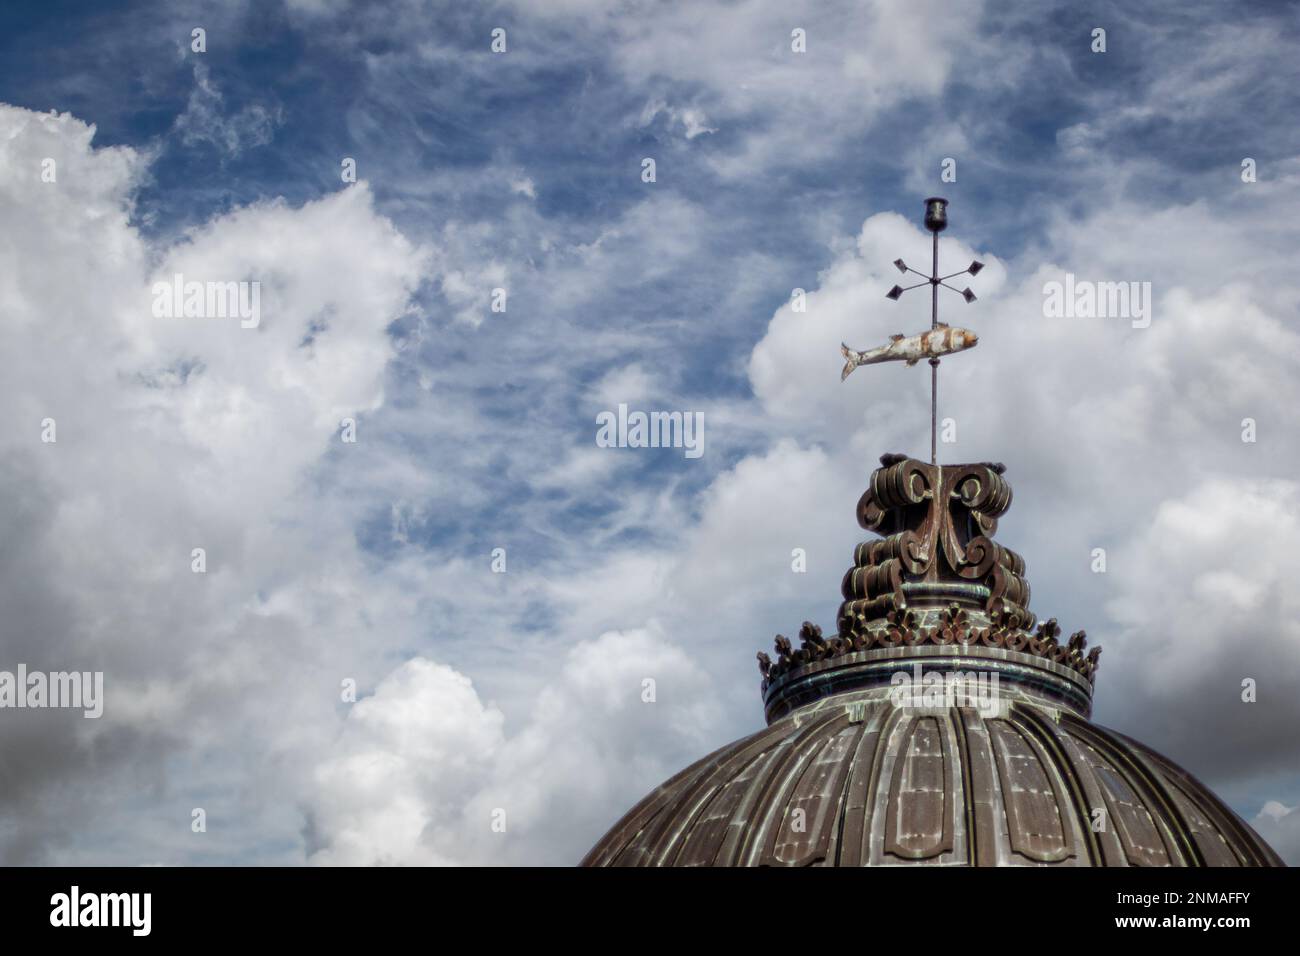 Copper dome with fish weather vane against cloudy sky Room for copy Stock Photo